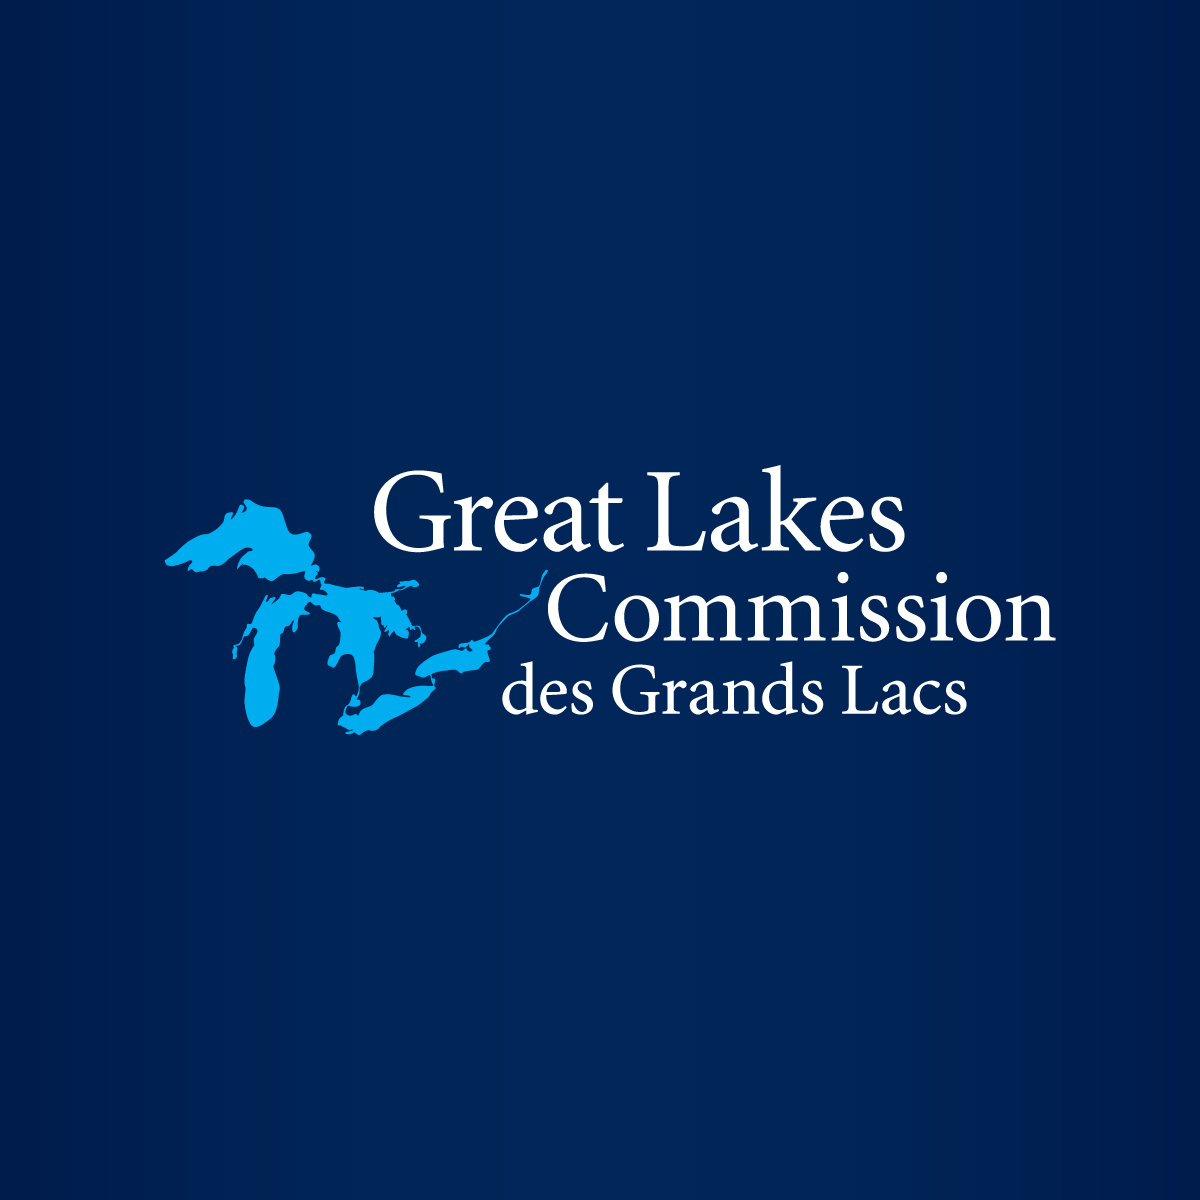 Escanaba added as port for Great Lakes cruises ahead of 2023 season